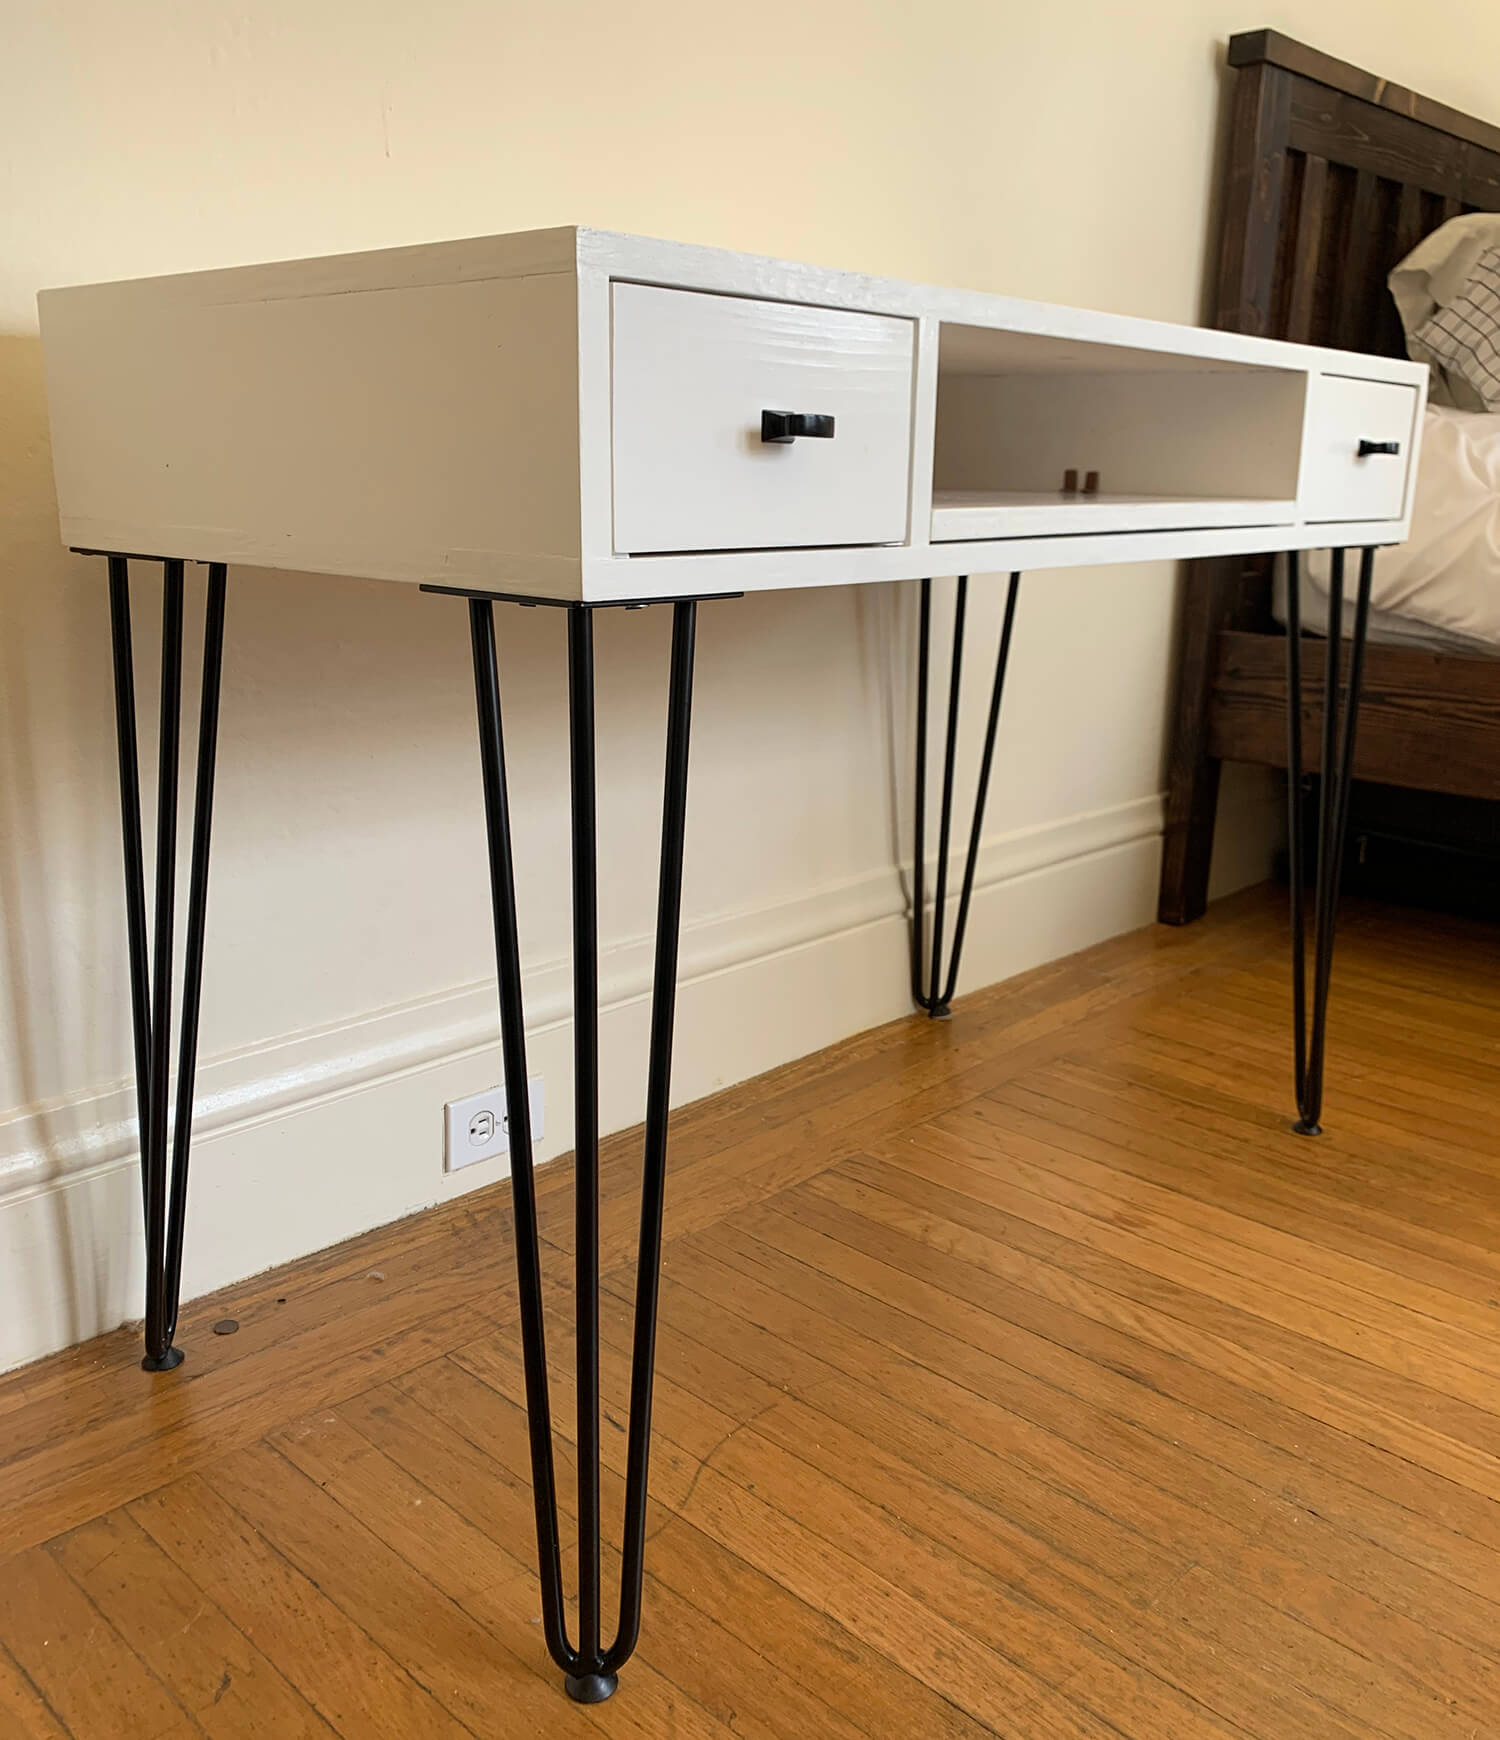 Maximize your small space with a custom small white desk by Urban Garden Studio, expertly designed for functionality and style to enhance your productivity and home decor.